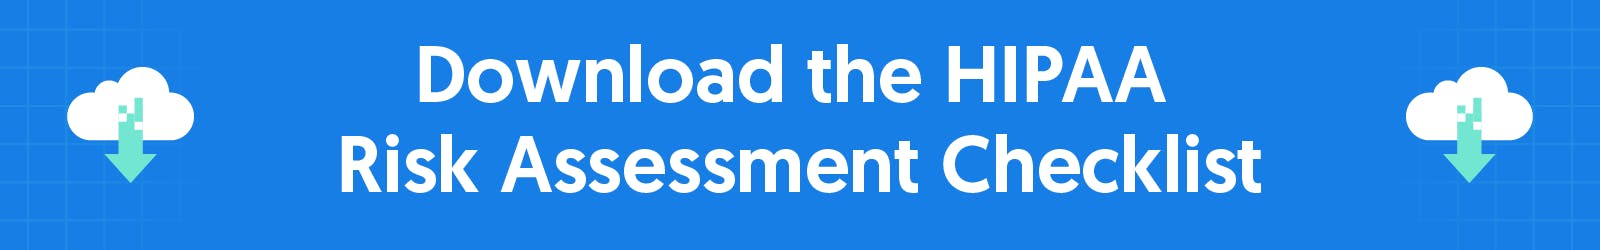 Blue rectangle with text reading: Download the HIPAA Risk Assessment Checklist